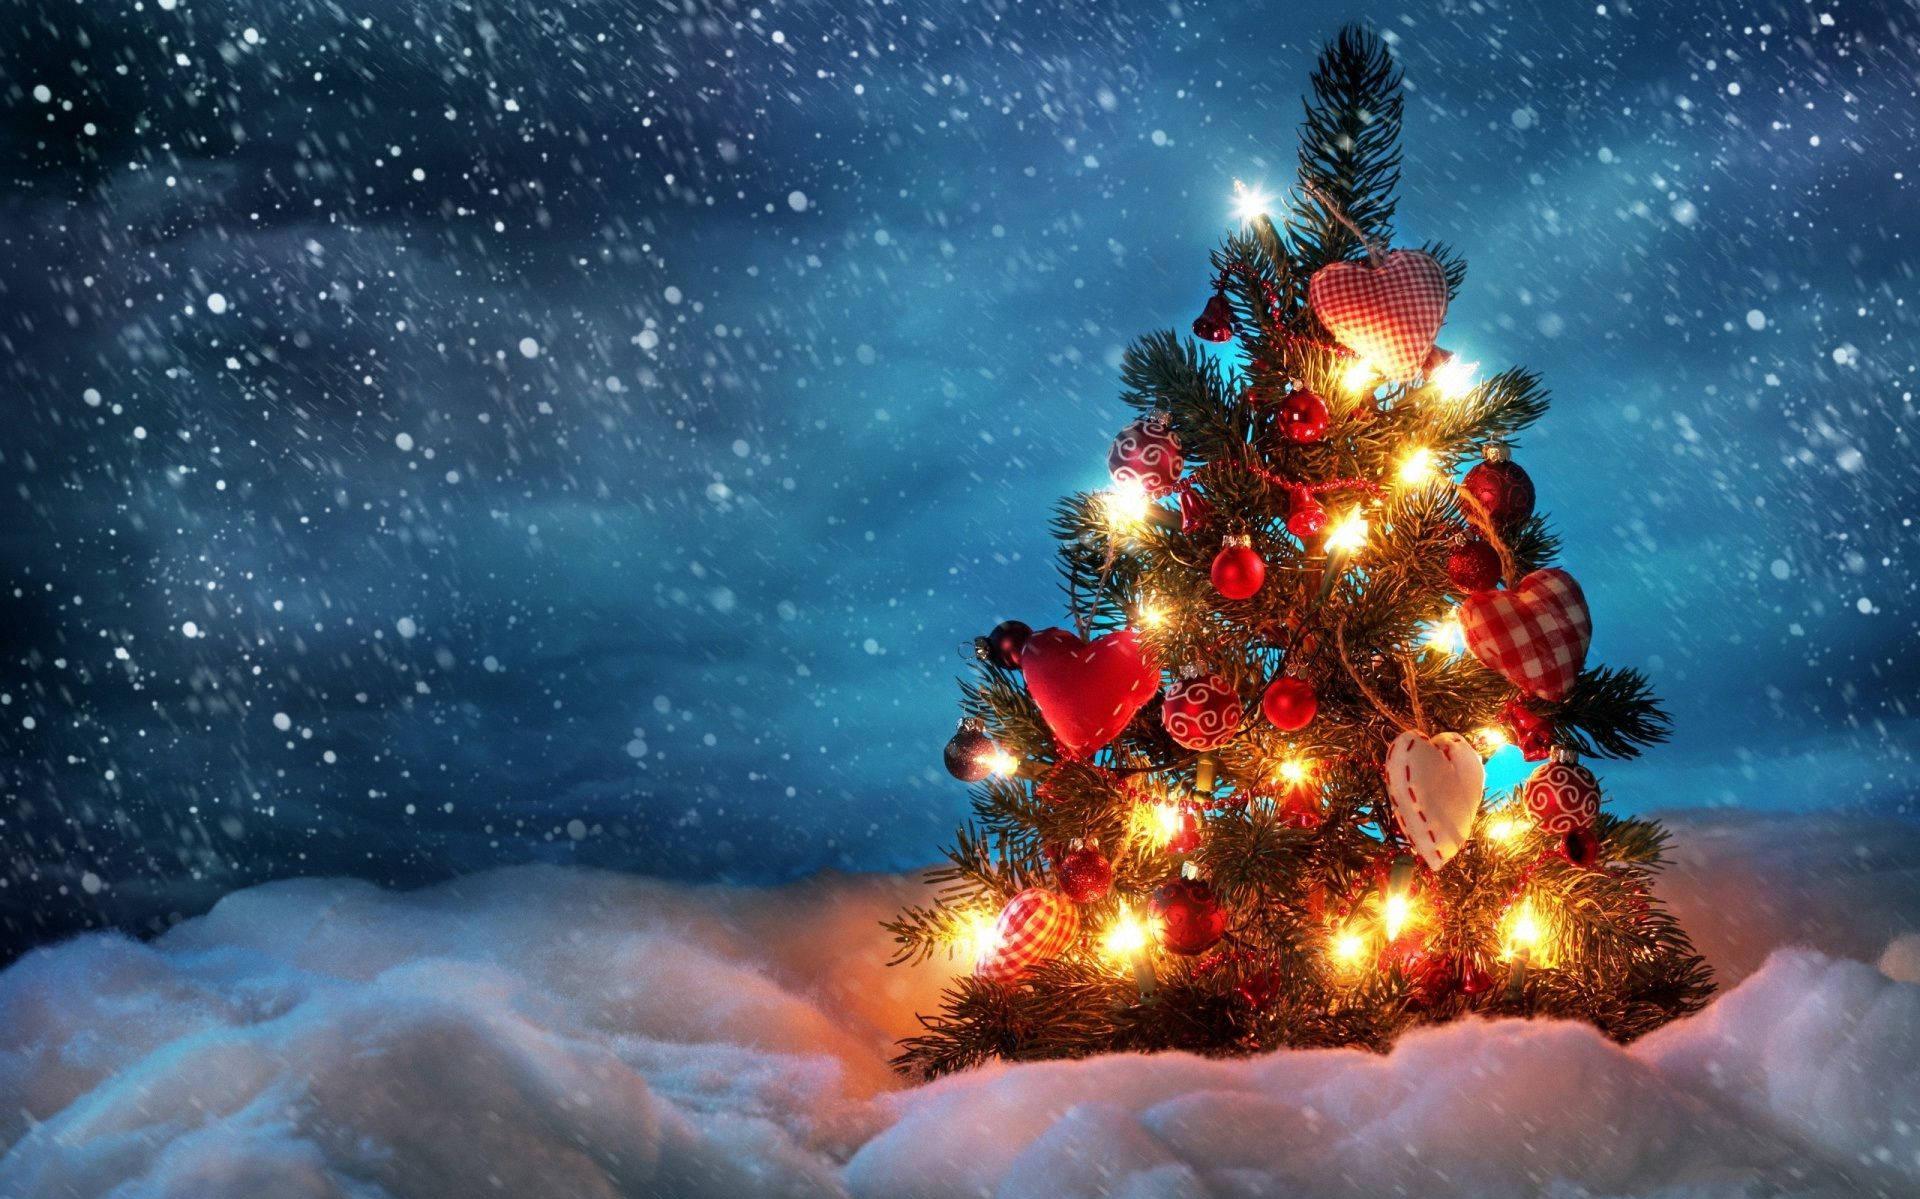 Download A Perfectly Lit Christmas Tree on a Cold Winters Night